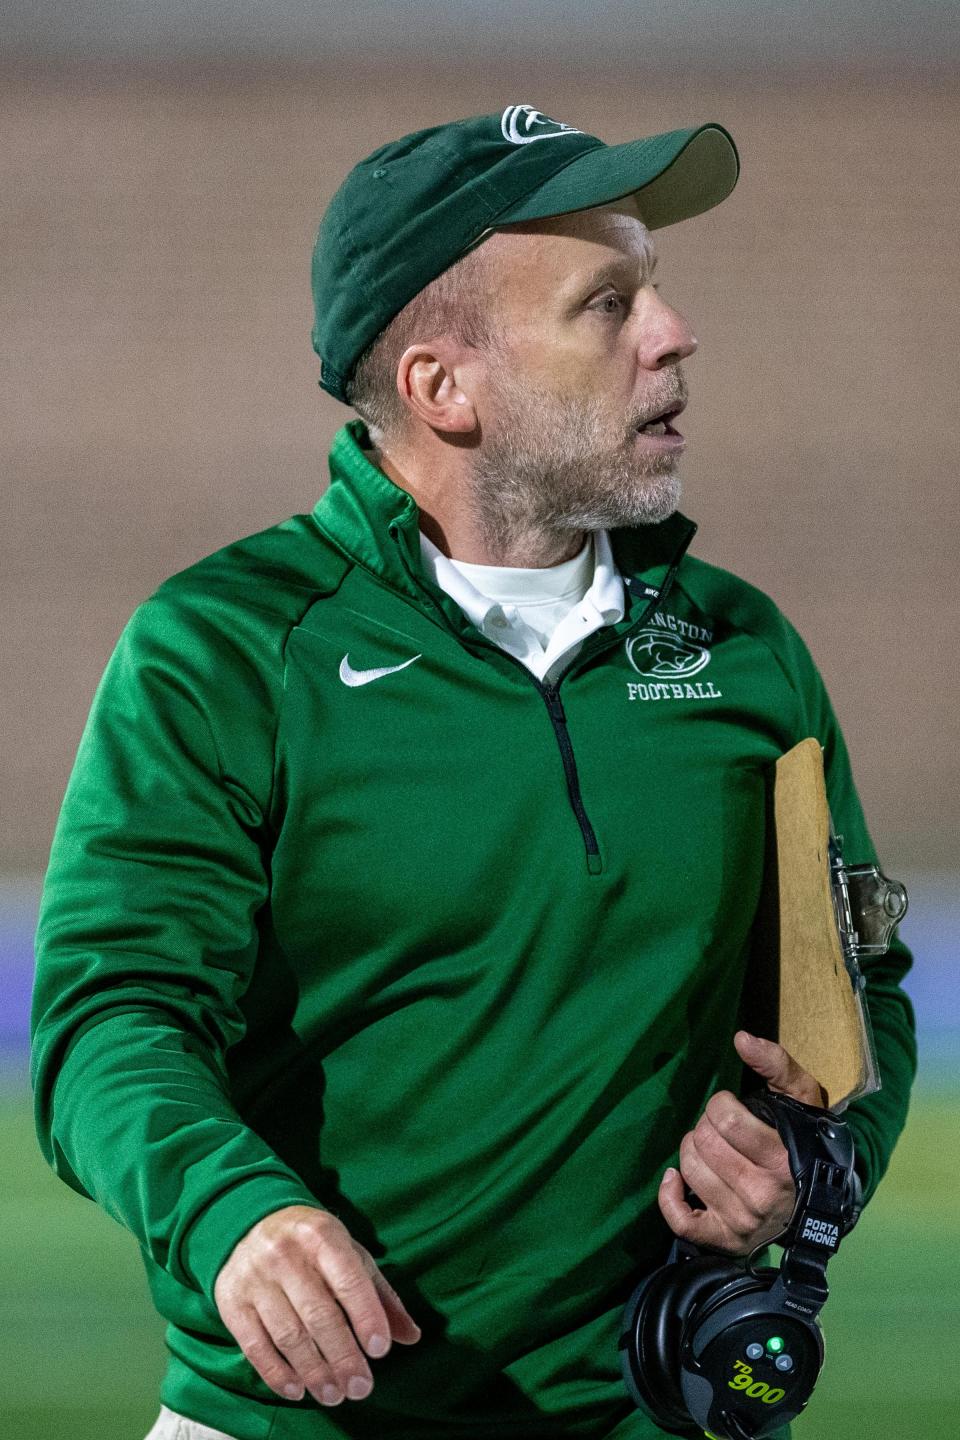 Washington head coach Todd Stammich during the Marian-Washington high school football game on Friday, October 22, 2021, at TCU School Field in South Bend, Indiana.